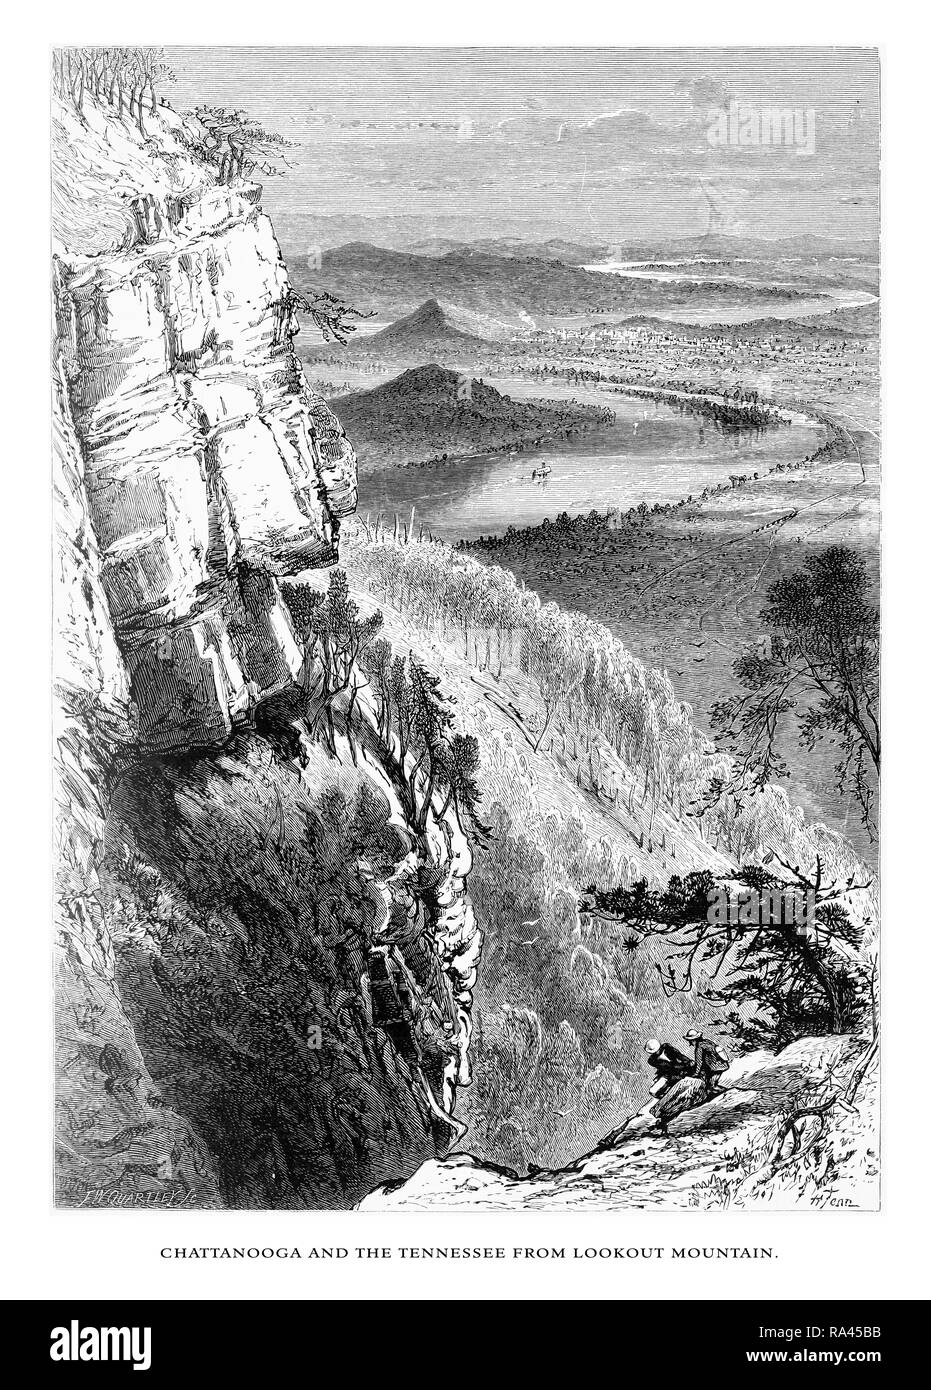 Chattanooga and the Tennessee River from Lookout Mountain, Tennessee, United States, American Victorian Engraving, 1872 Stock Photo